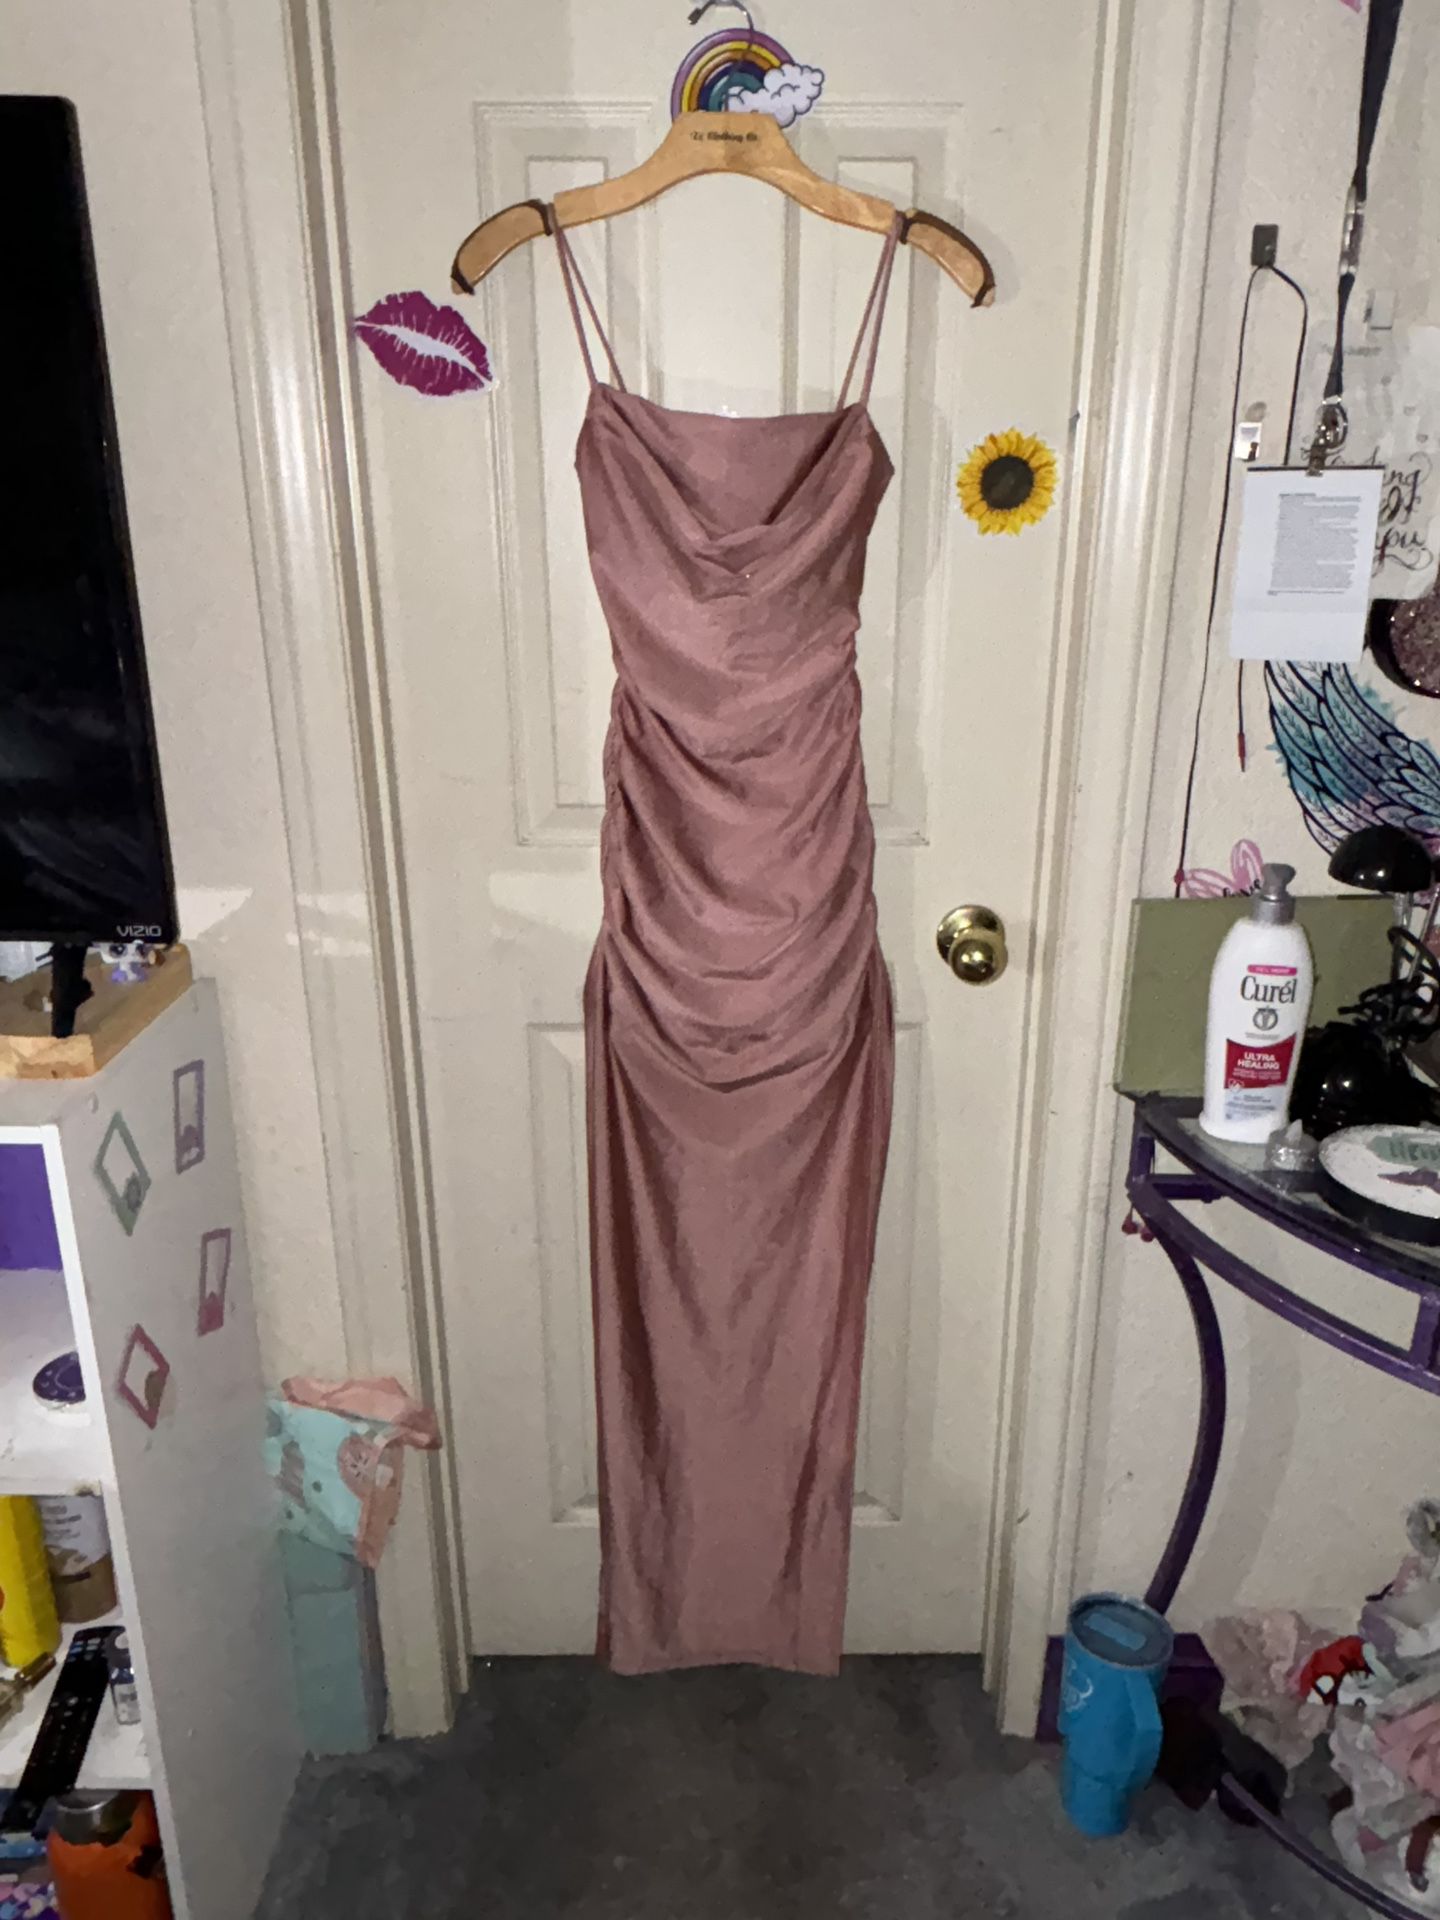 Prom / Homecoming Dress Size Small